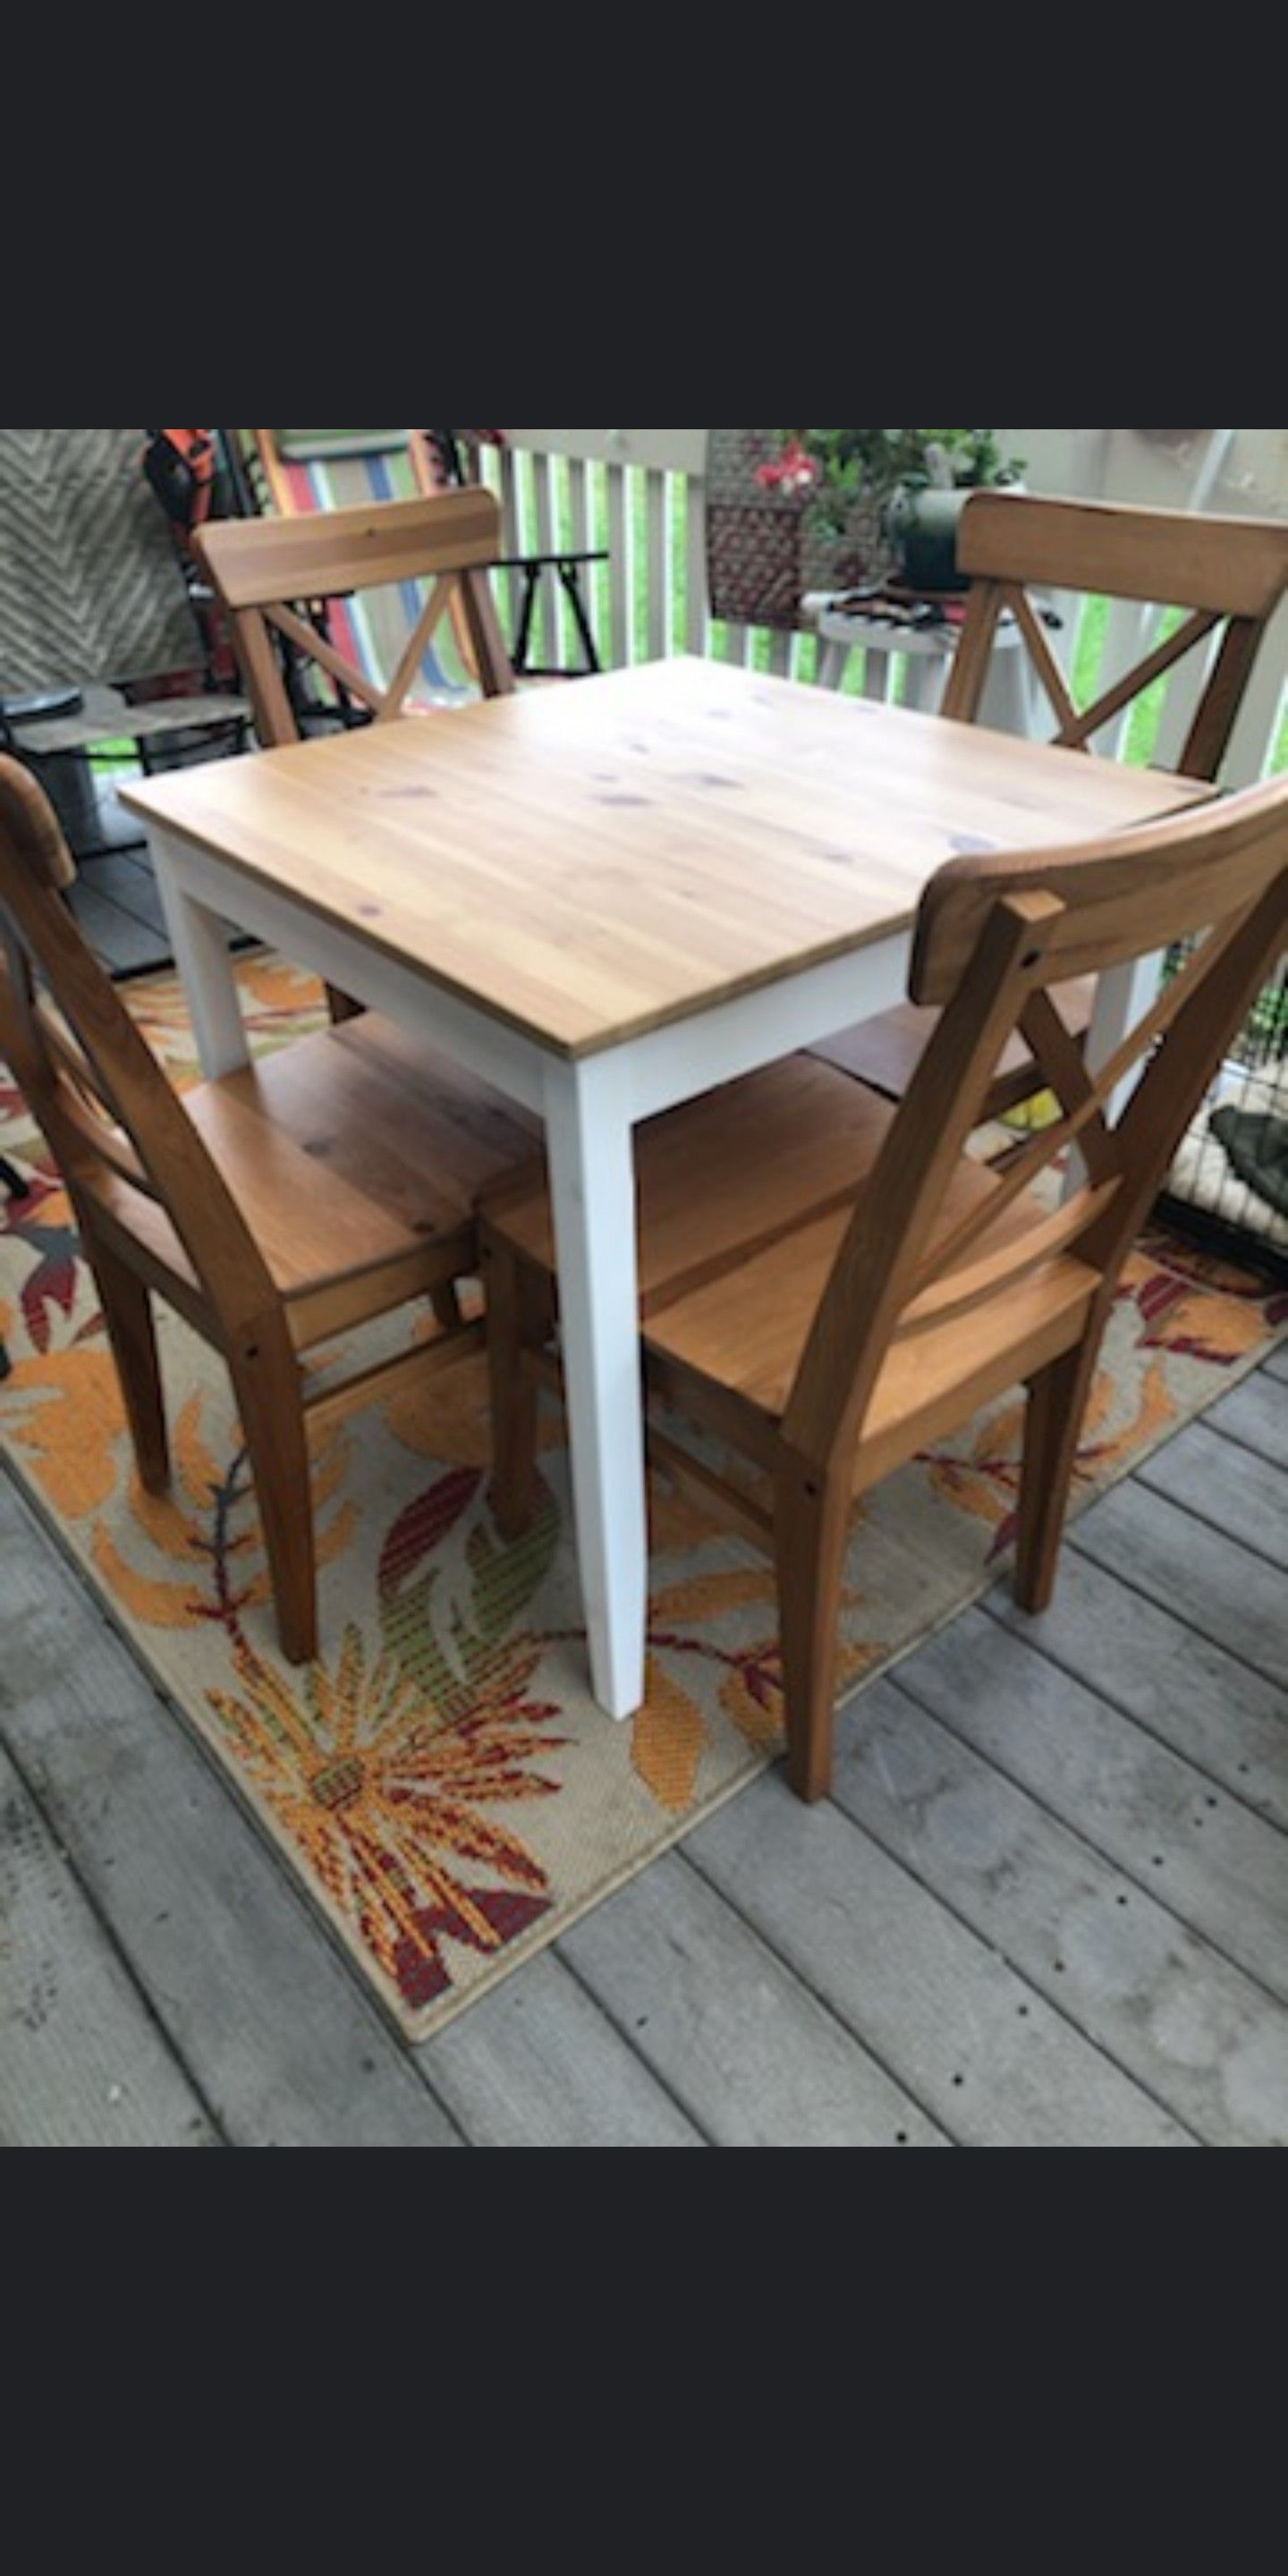 All wood table & chairs